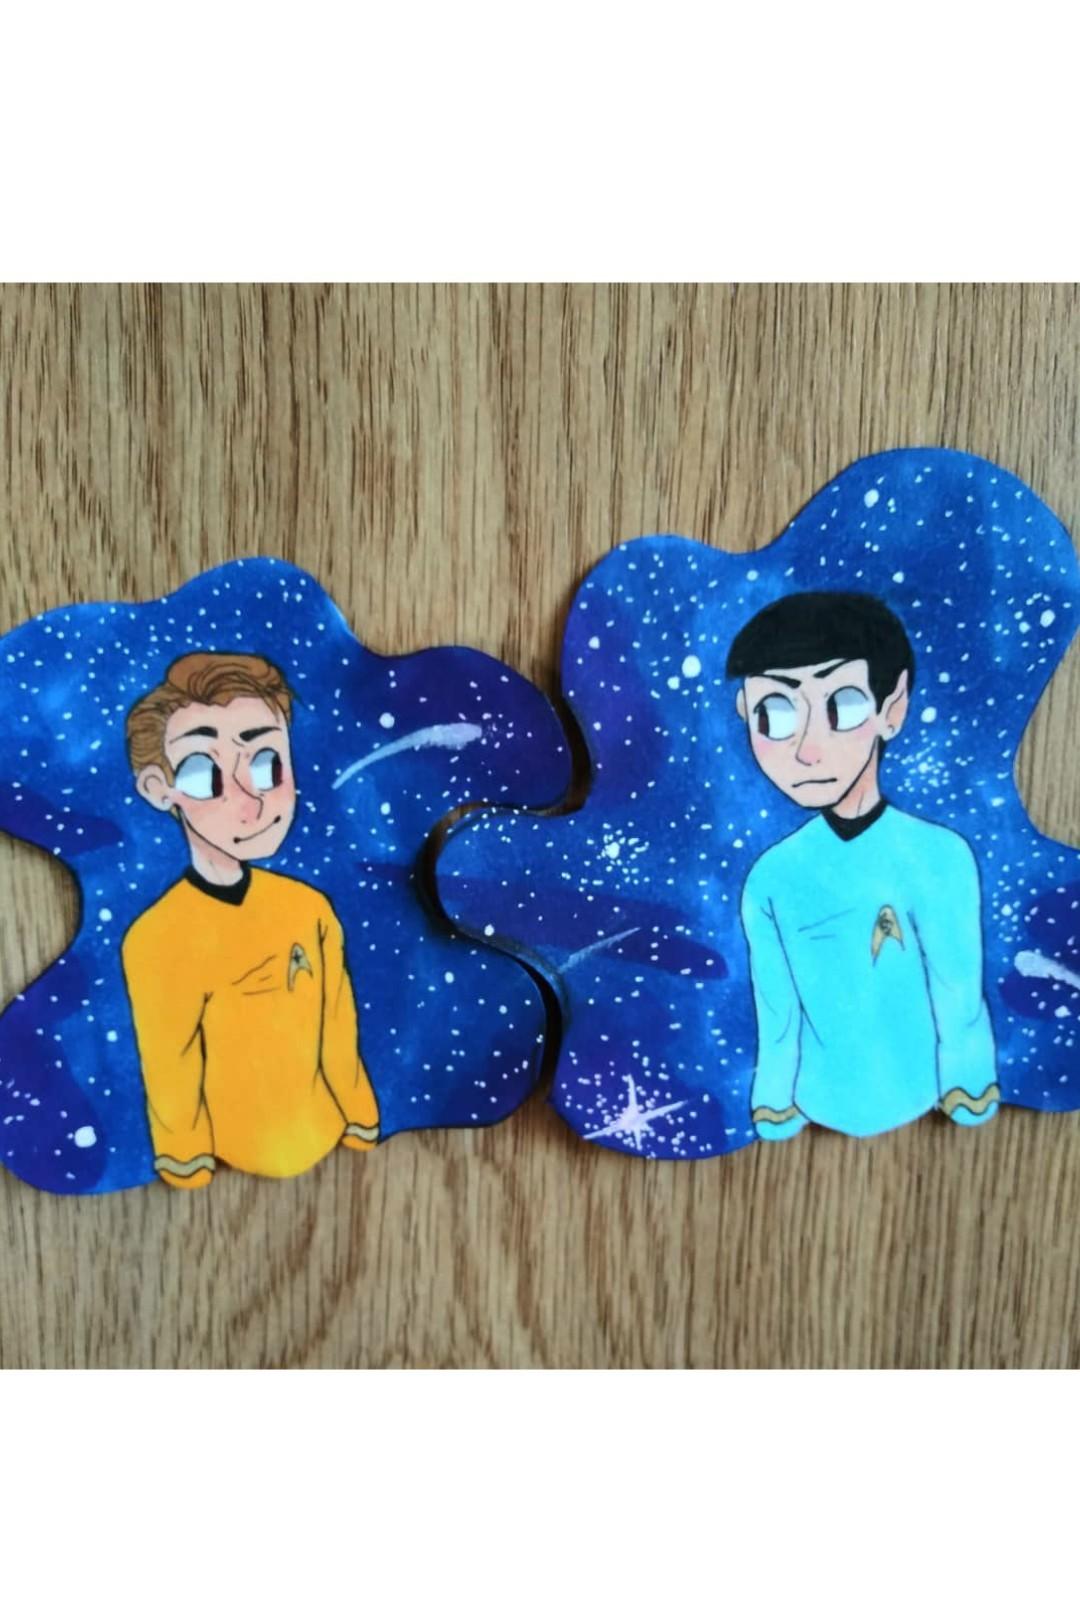 I love the Original Star Trek a lot. More than I love myself! And just last weekend was my sister's birthday, so because she loooves this show I drew her Kirk and Spock. Love em